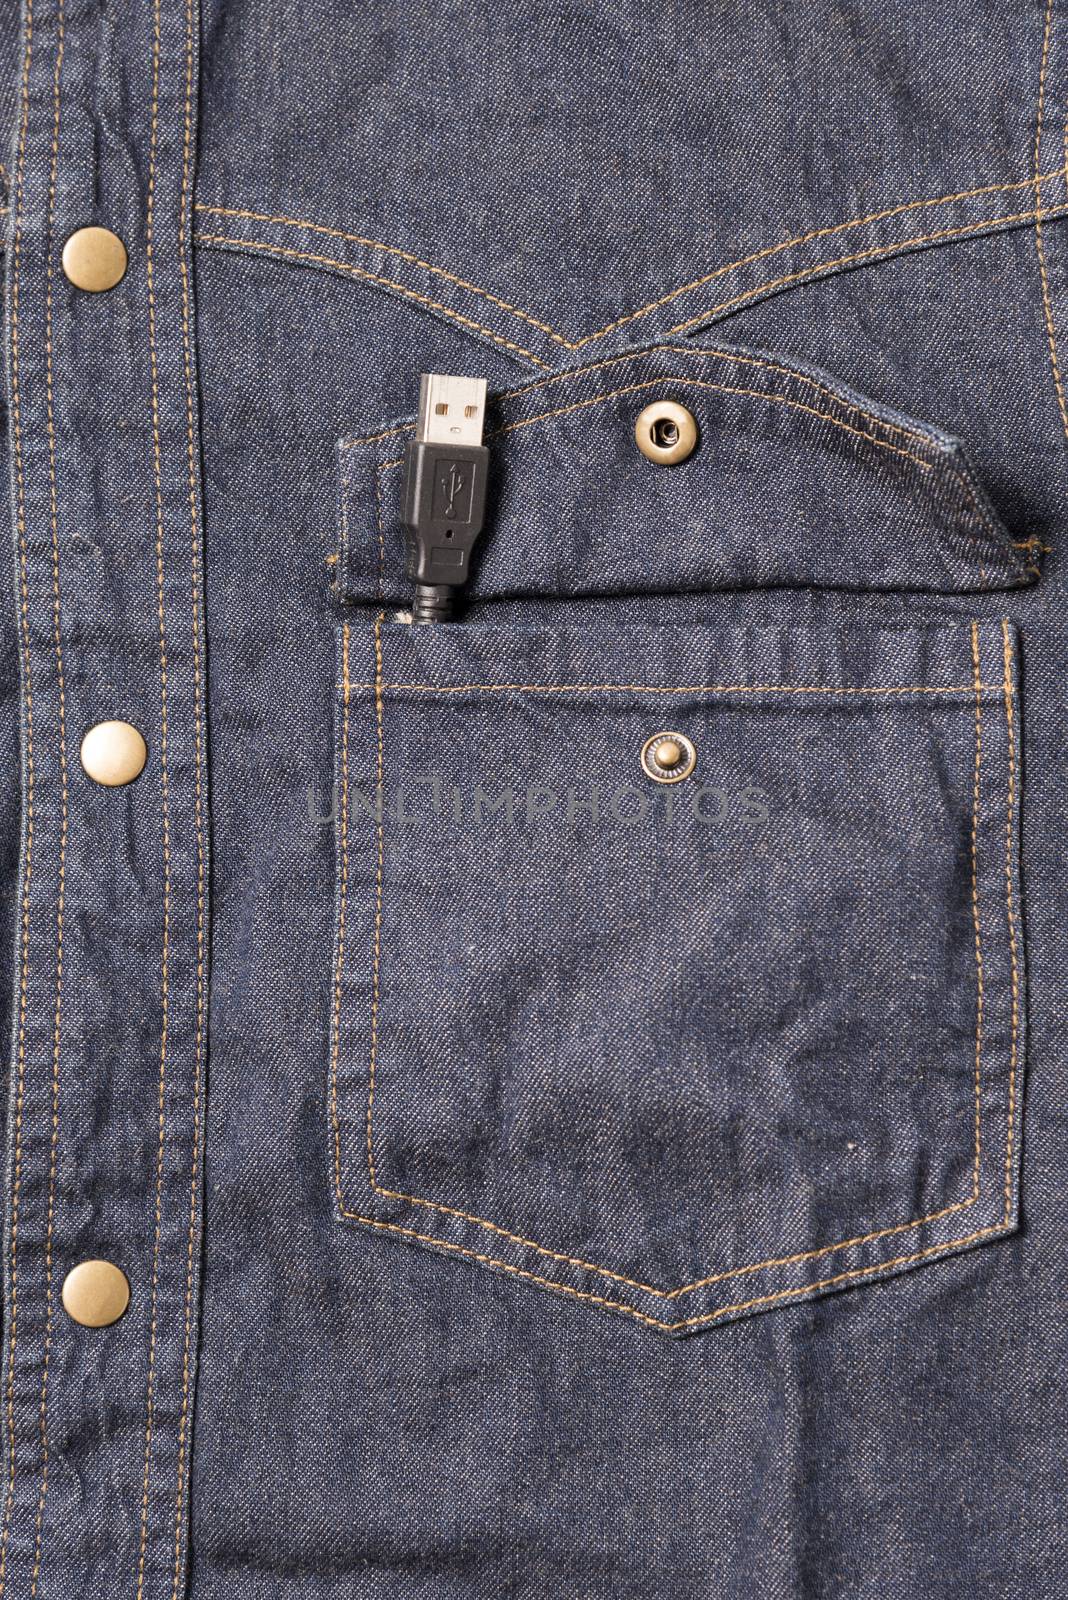 usb cable in jean pocket by ammza12